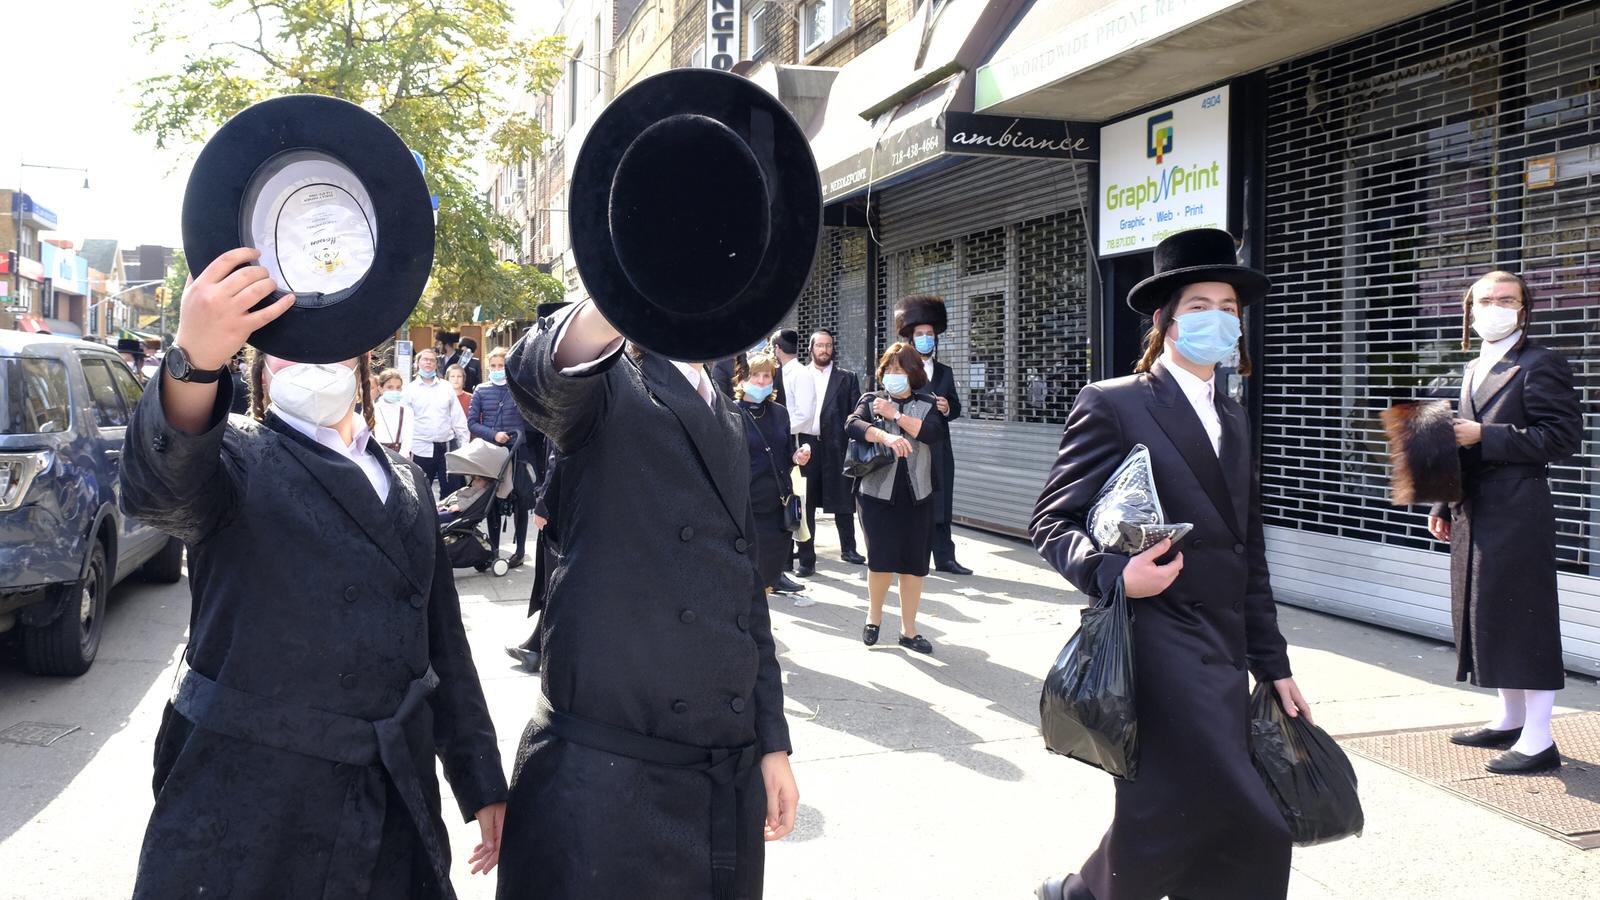 Photojournalism - Brooklyn - October 7, 2020 - A group of Orthodox Jewish...